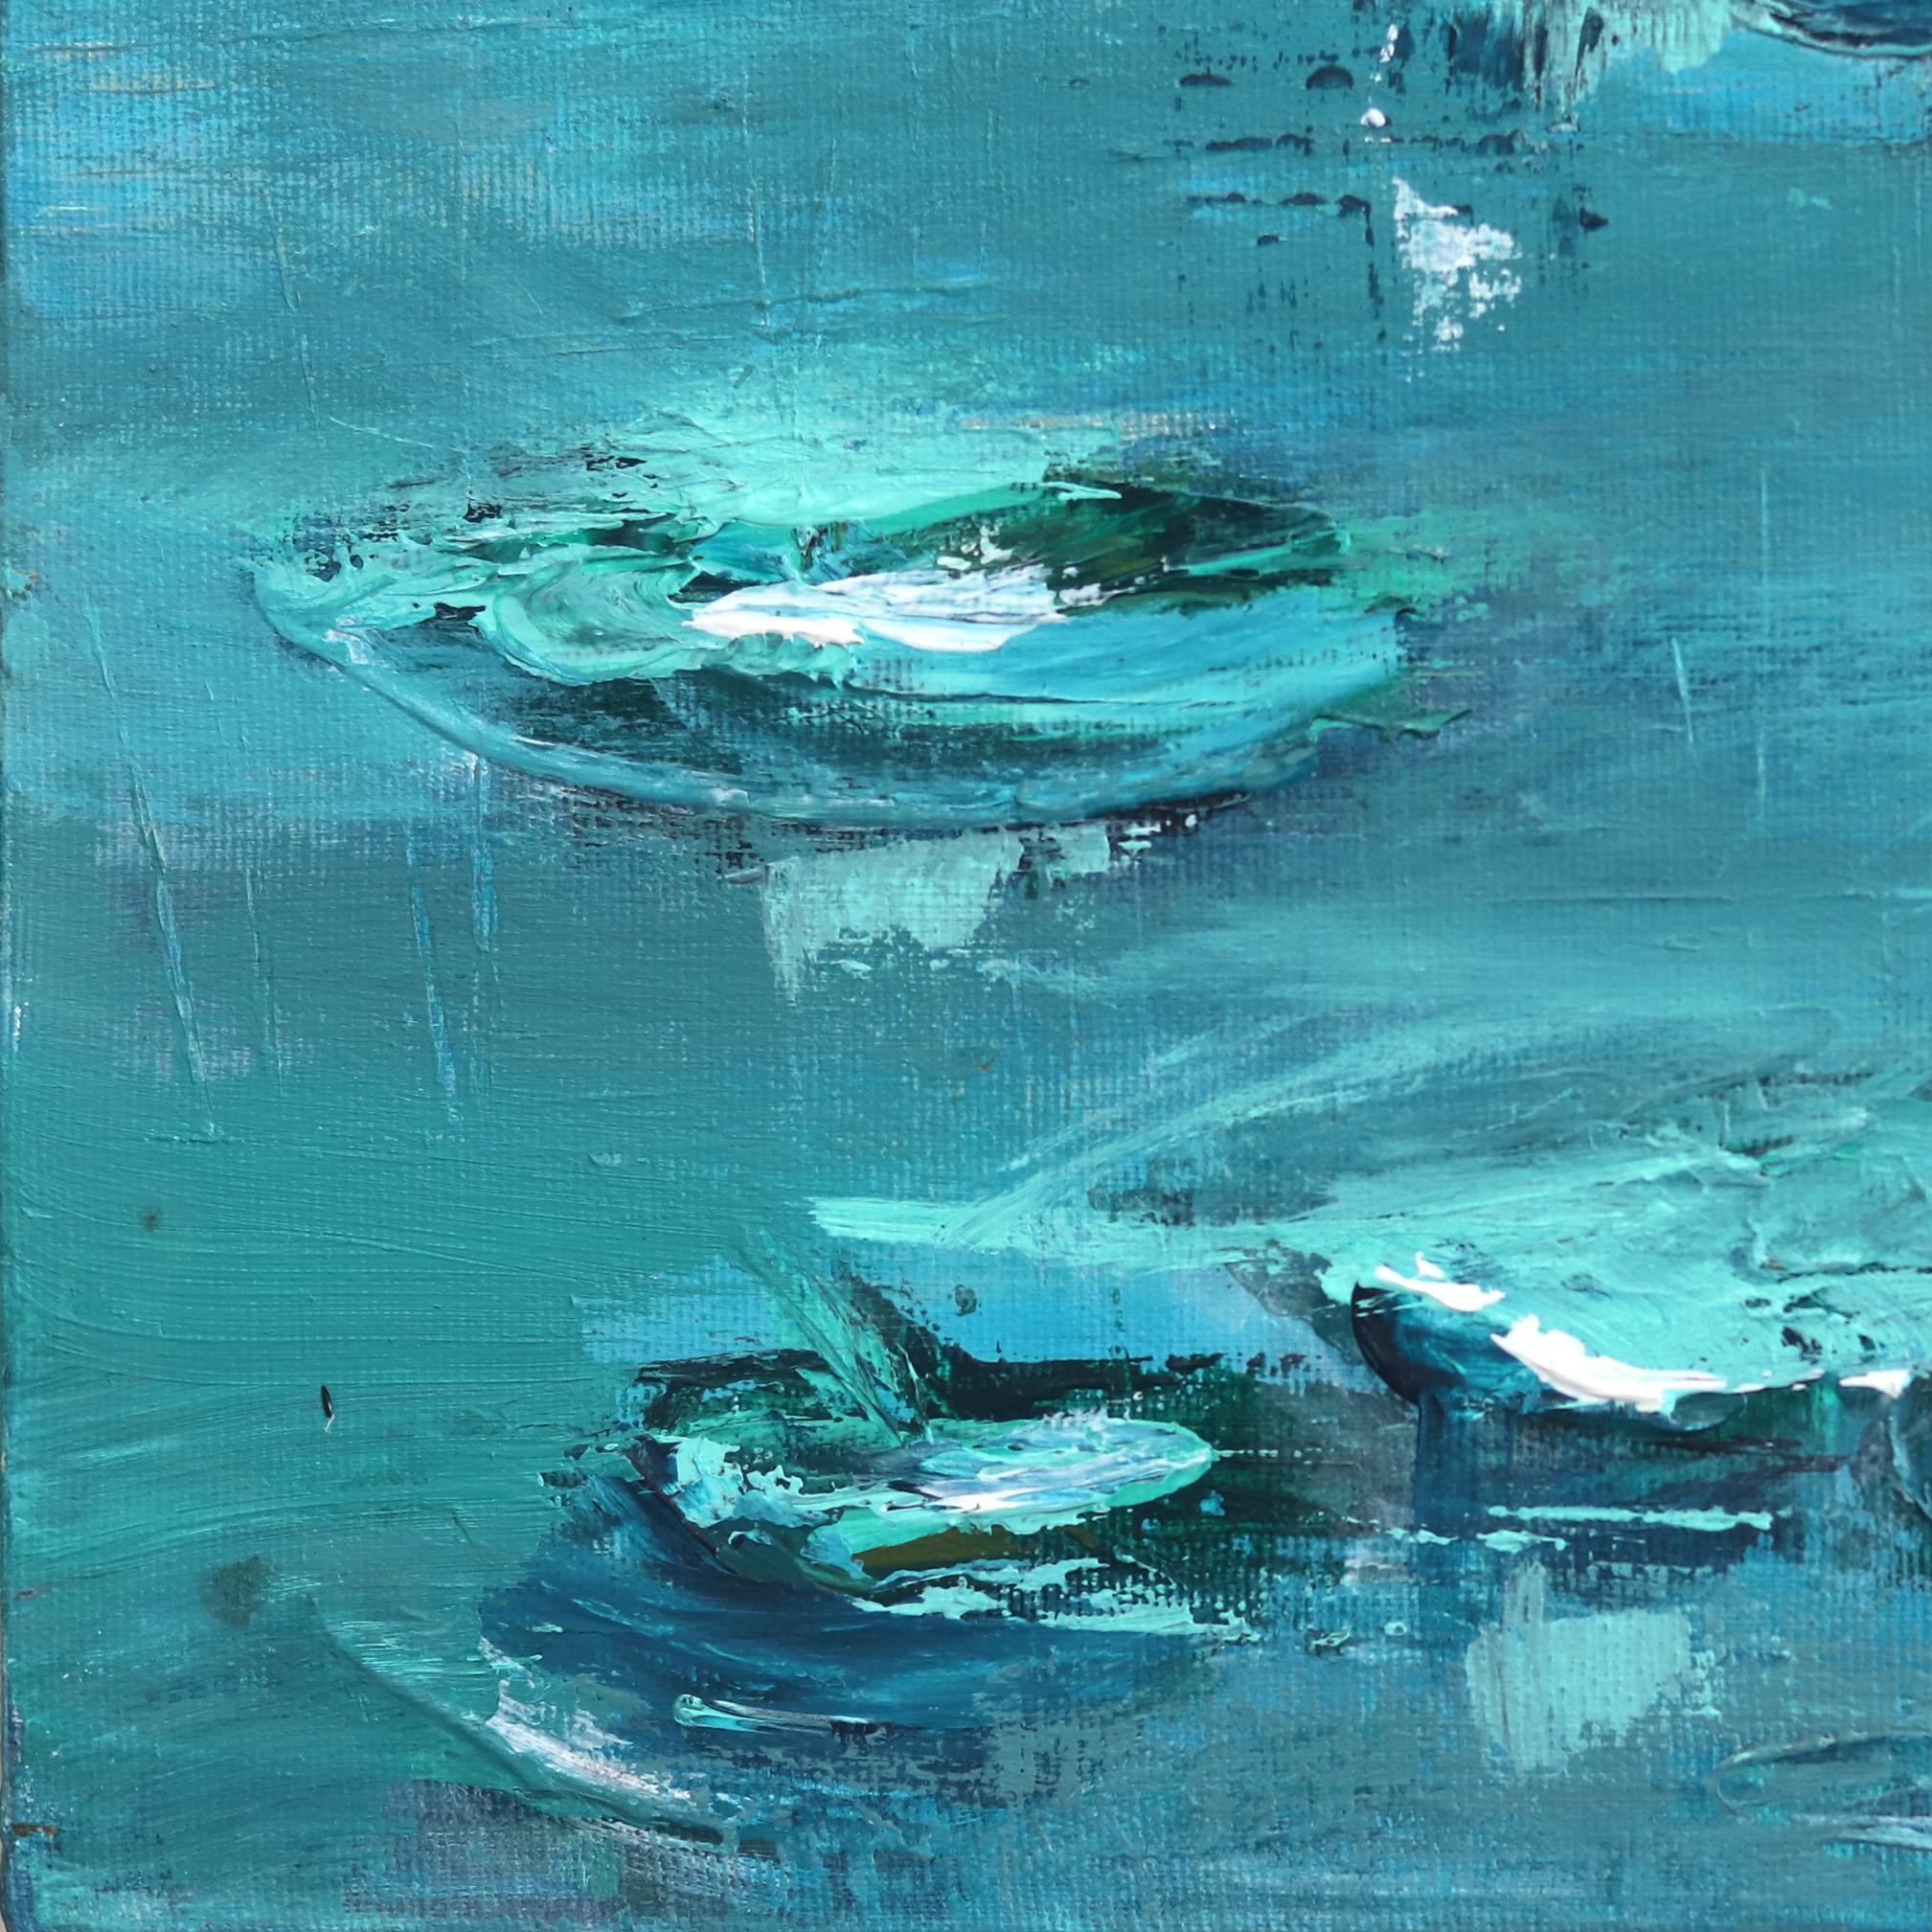 Lily Pond - Large Original Impressionist Monet Style Waterscape Painting - Blue Landscape Painting by Ivana Milosevic